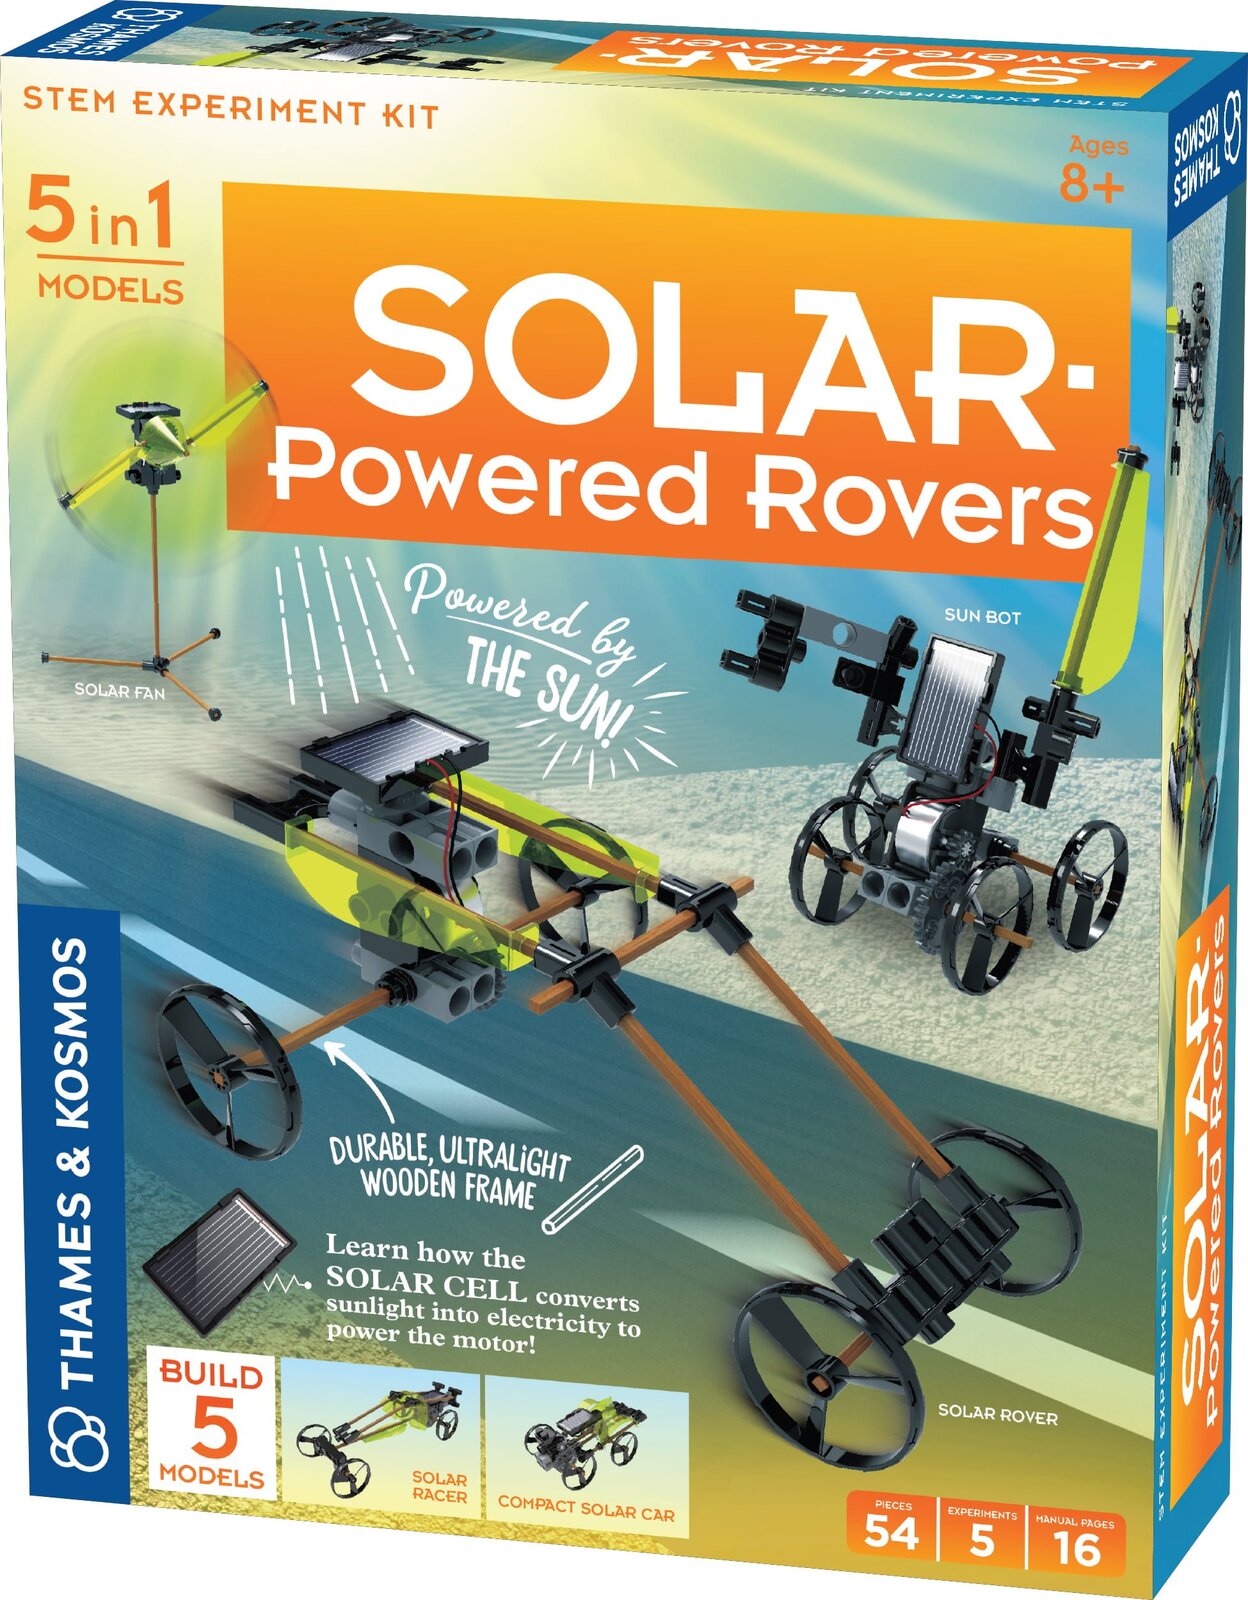 Solar Powered Rovers image